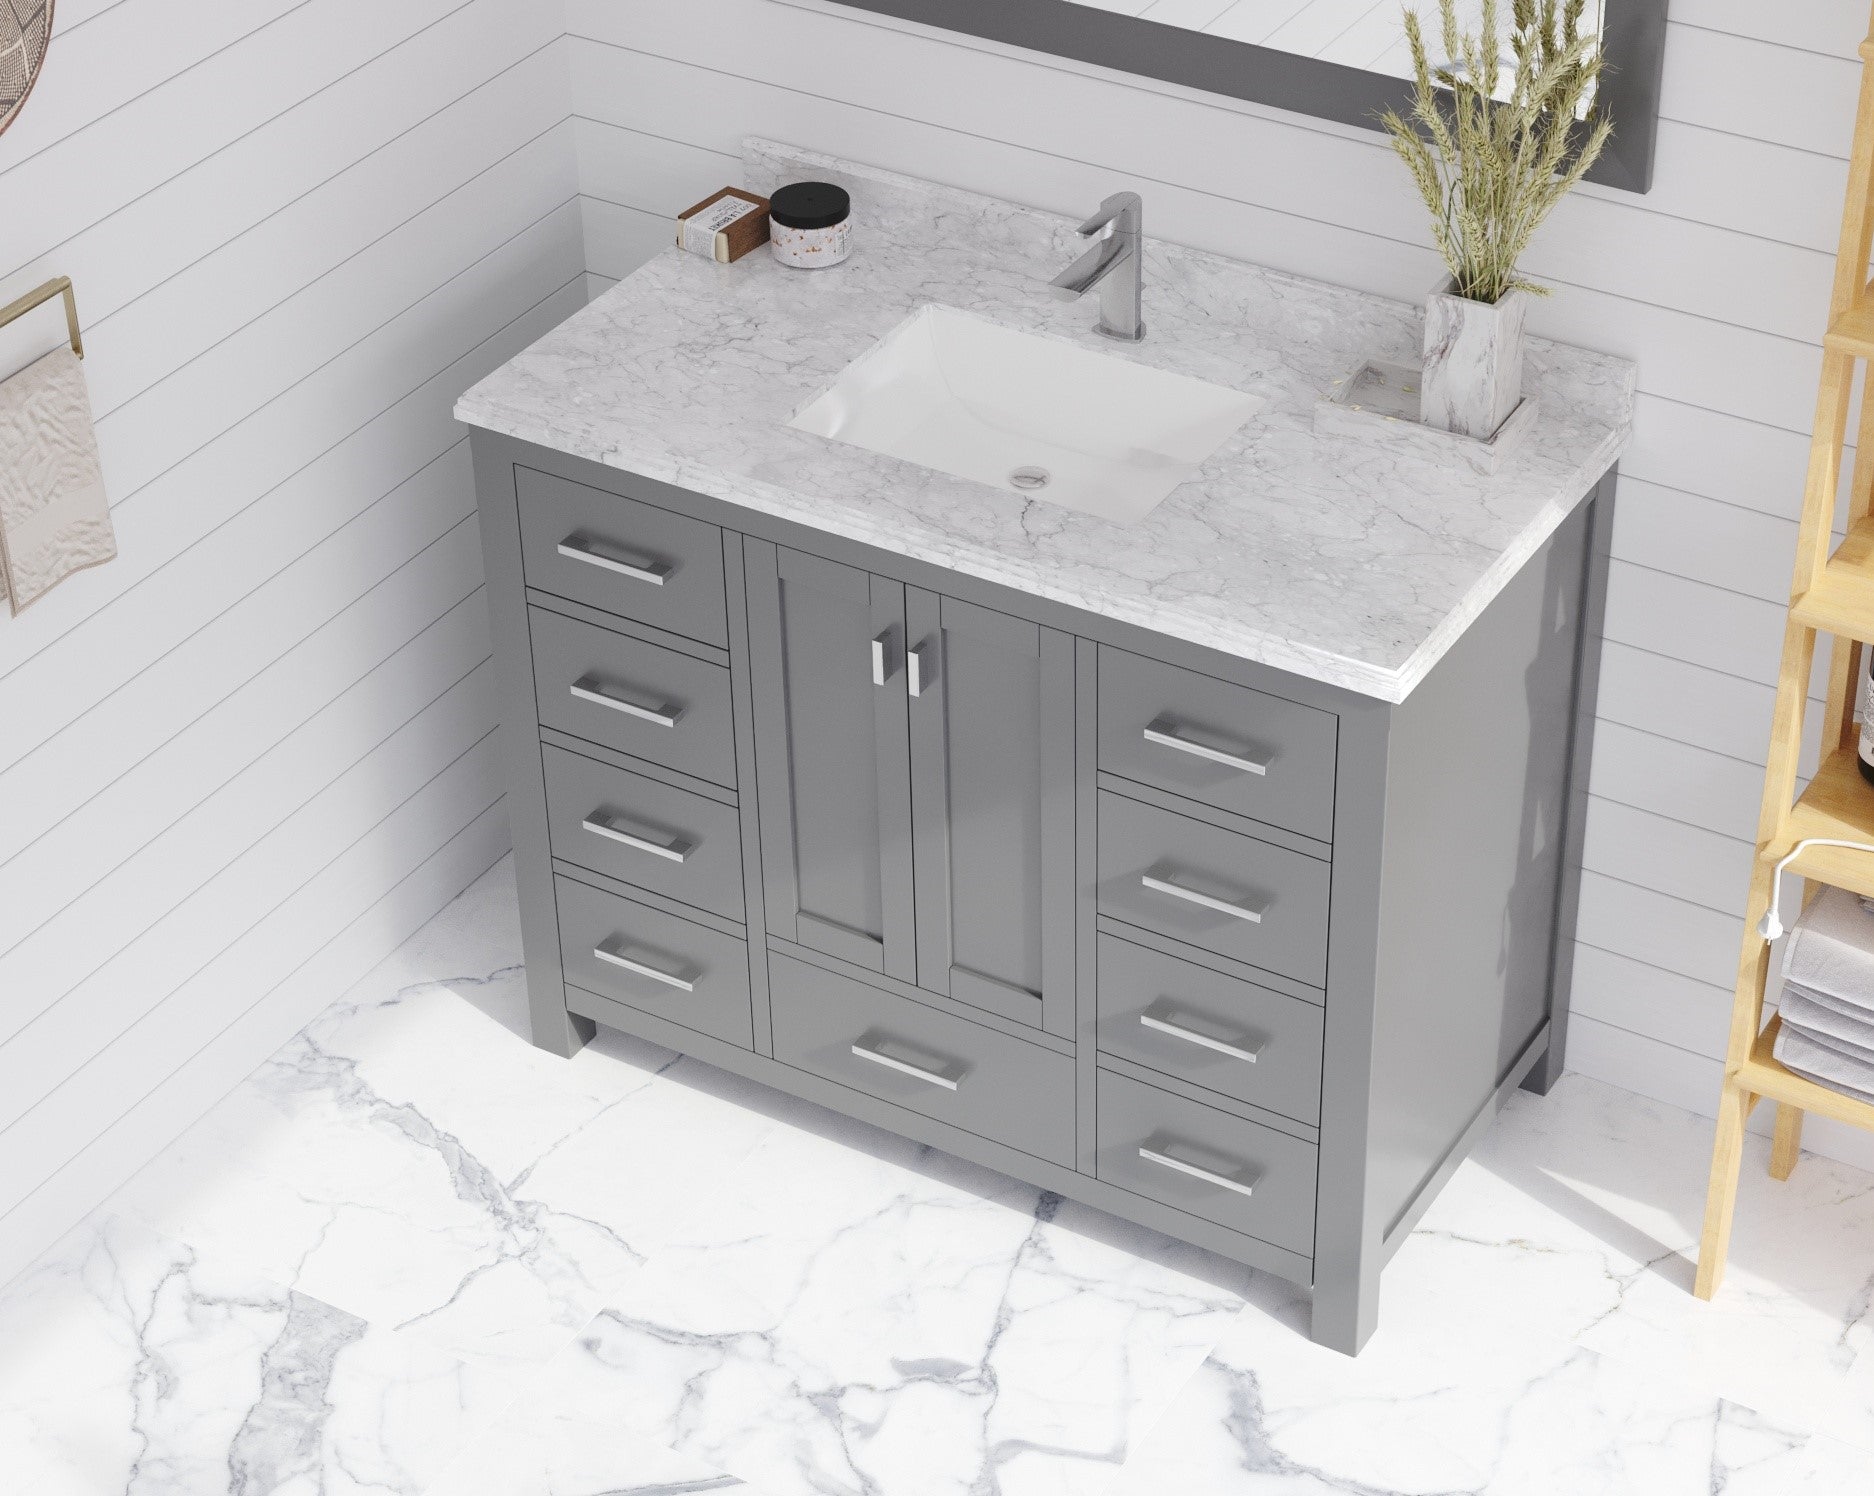 Laviva Forever 42" Single Hole White Carrara Marble Countertop with Rectangular Ceramic Sink | 313SQ1H-42-WC